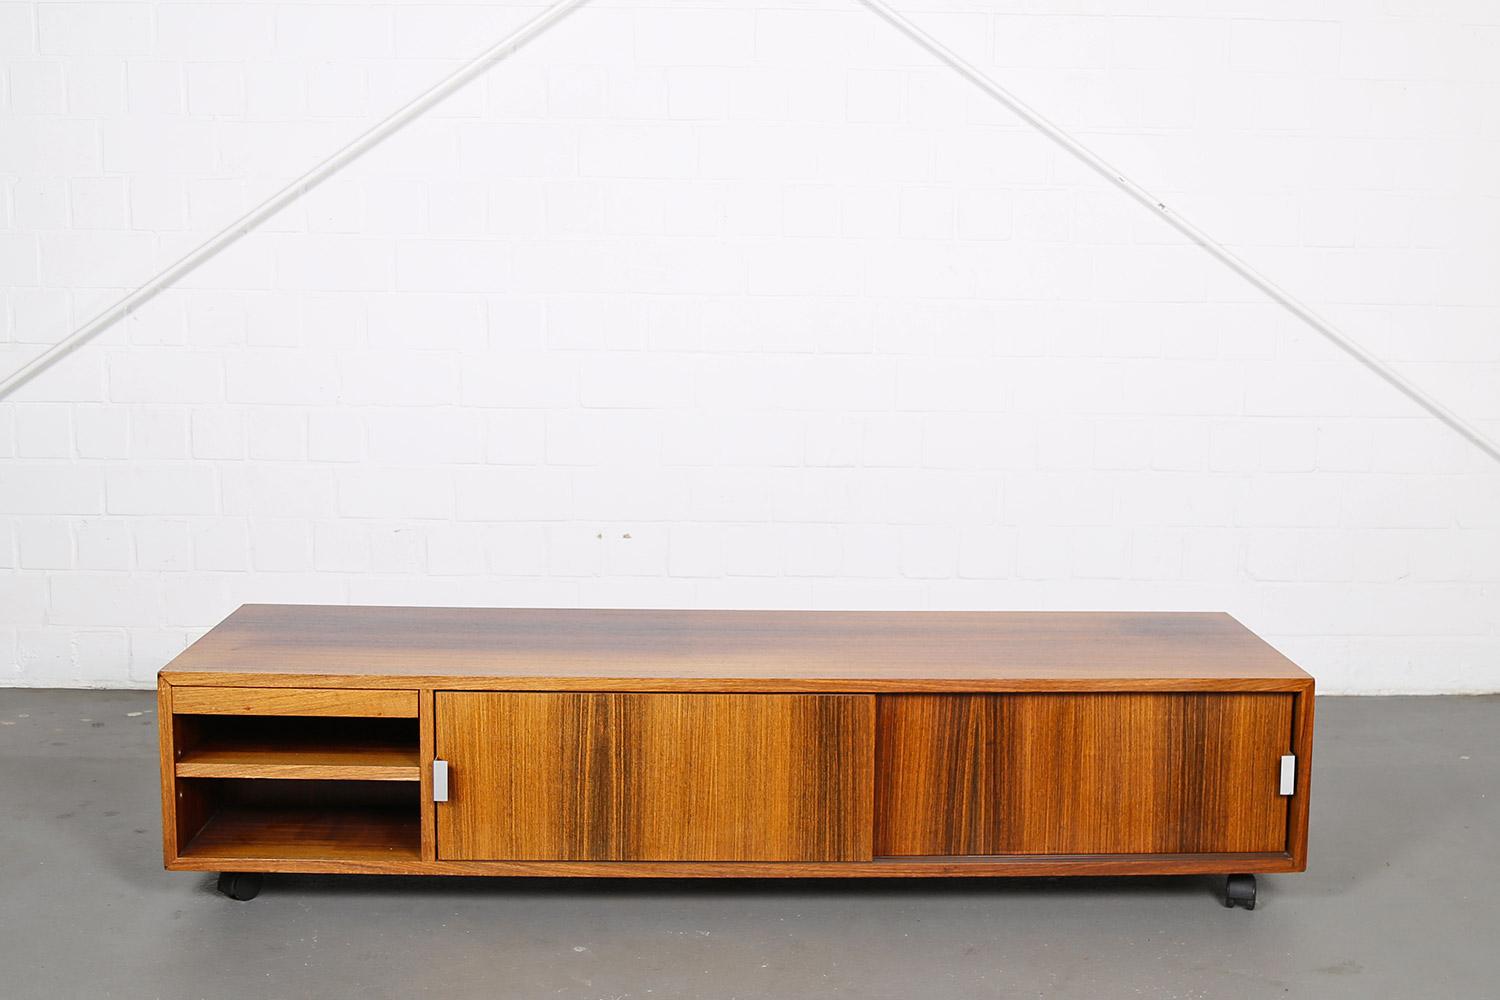 A rare - and never seen before - Bofinger Produktion Lowboard designed by Antoine Philippon in the 70s made from Rosewood. Can be used as a room divider because both sides are equipped with shelves.